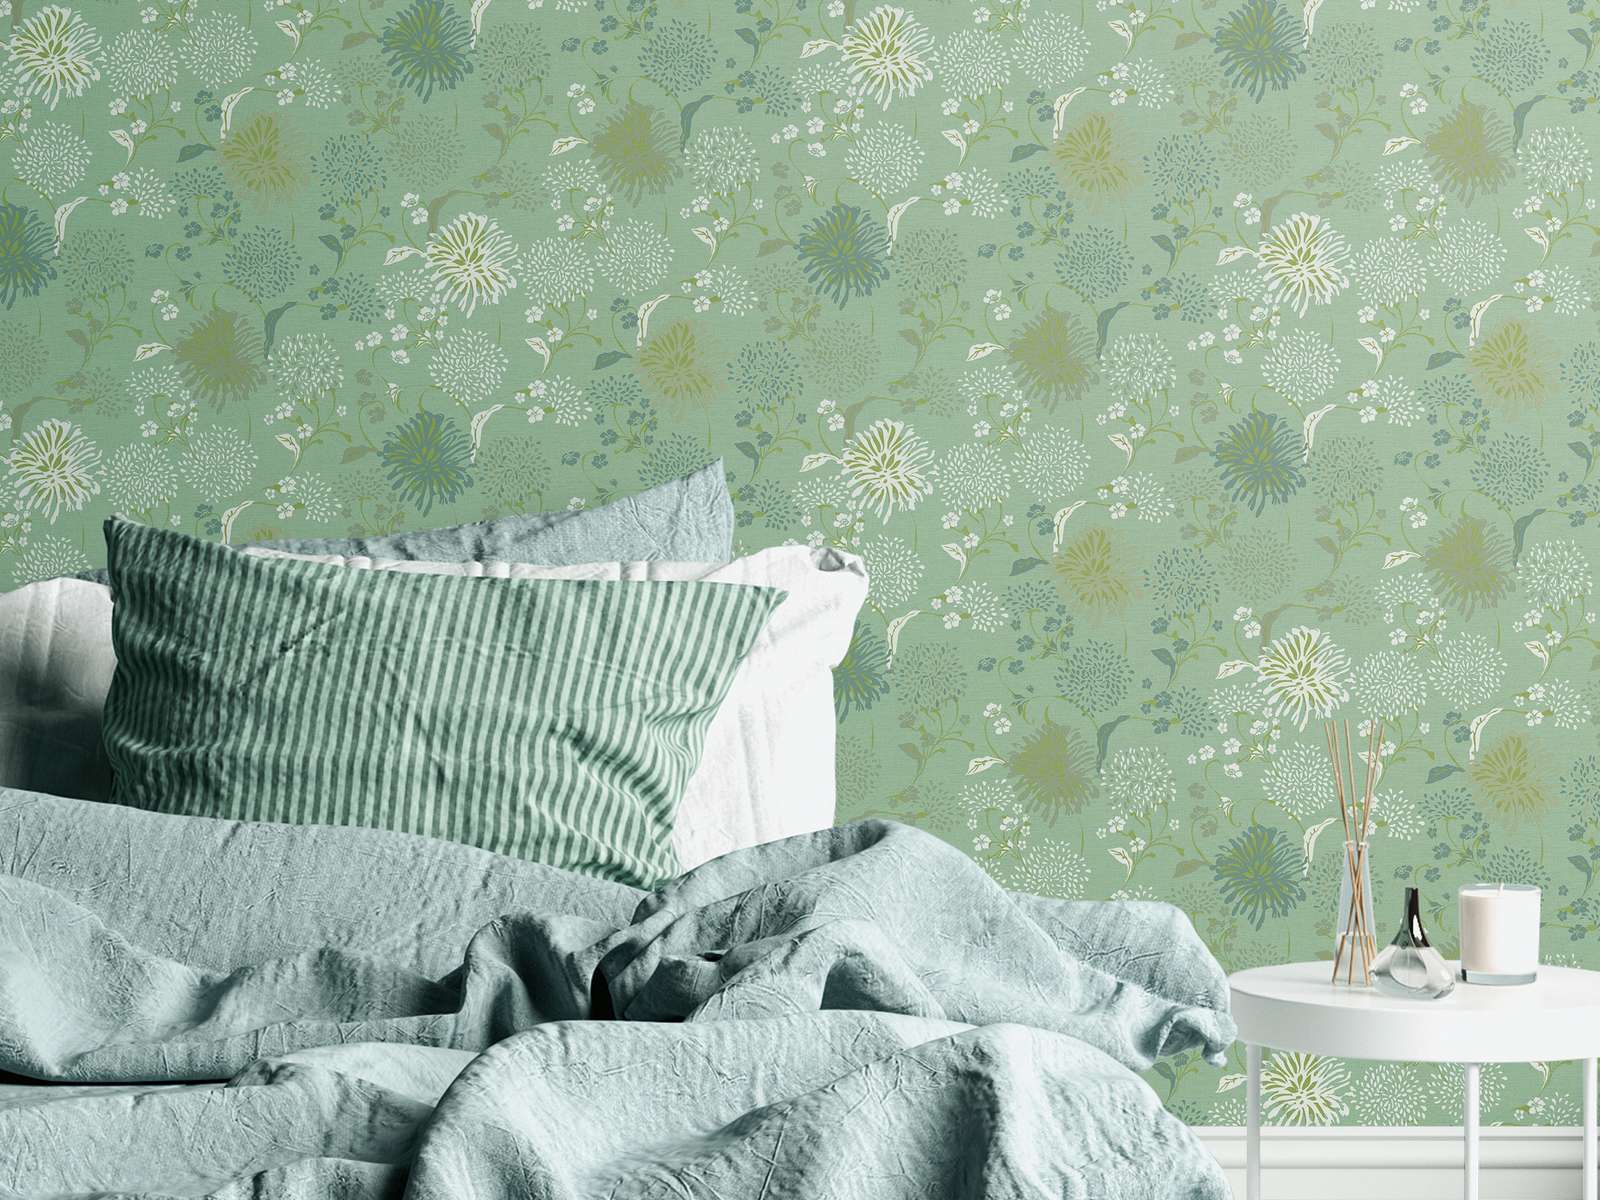             Non-woven wallpaper with floral dandelion pattern - green, white
        